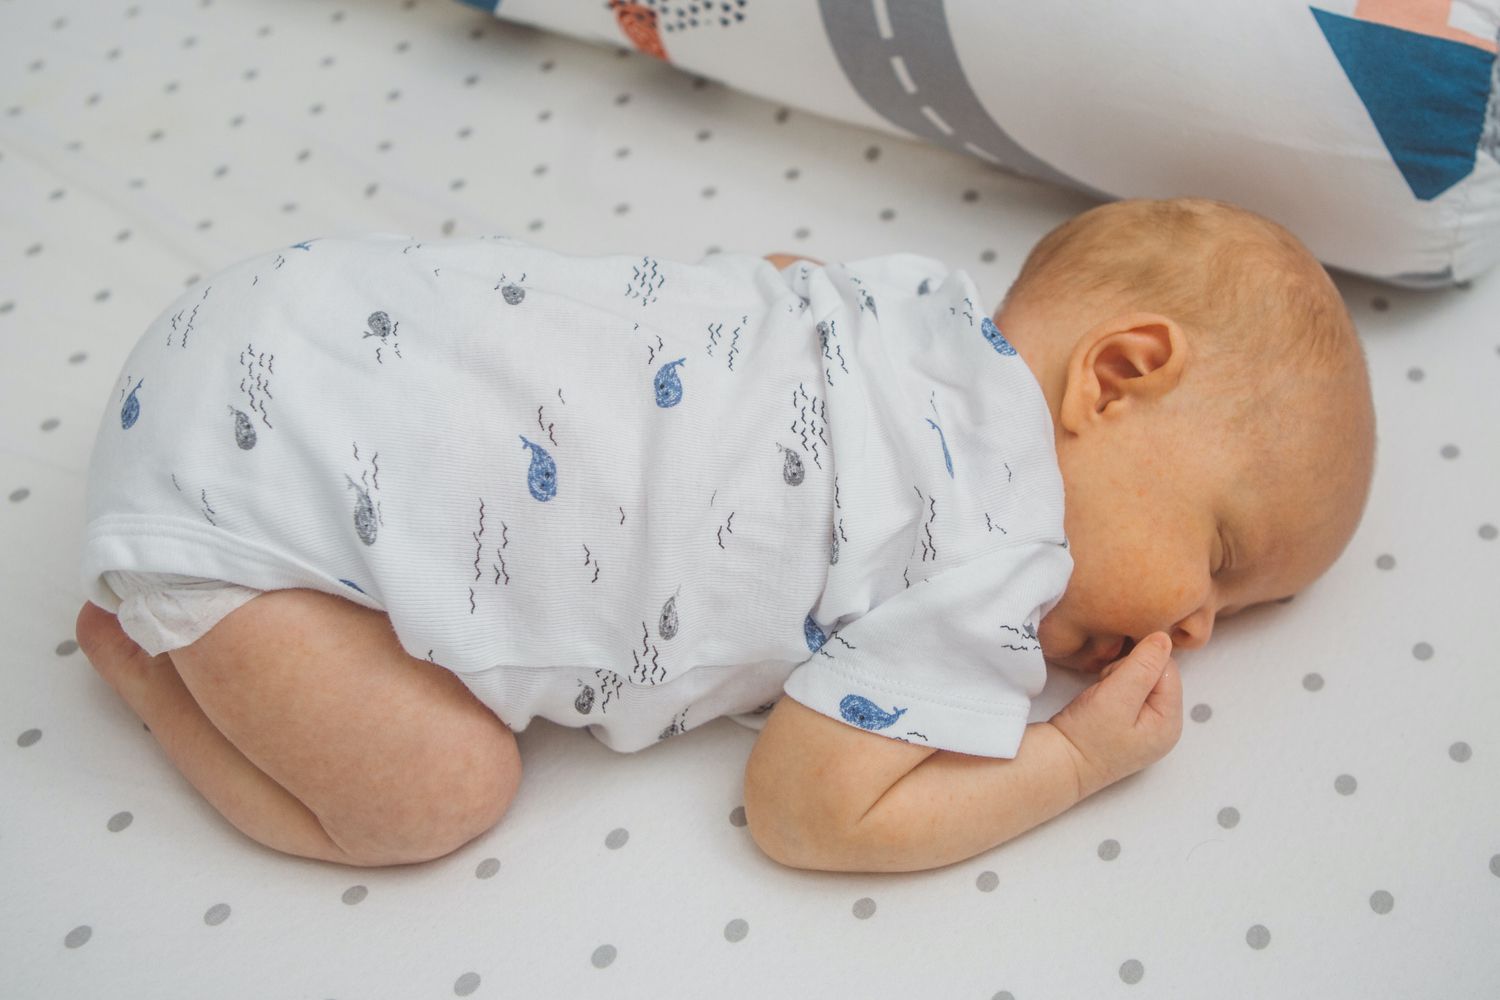 When Can Babies Start Sleeping on Their Stomachs?